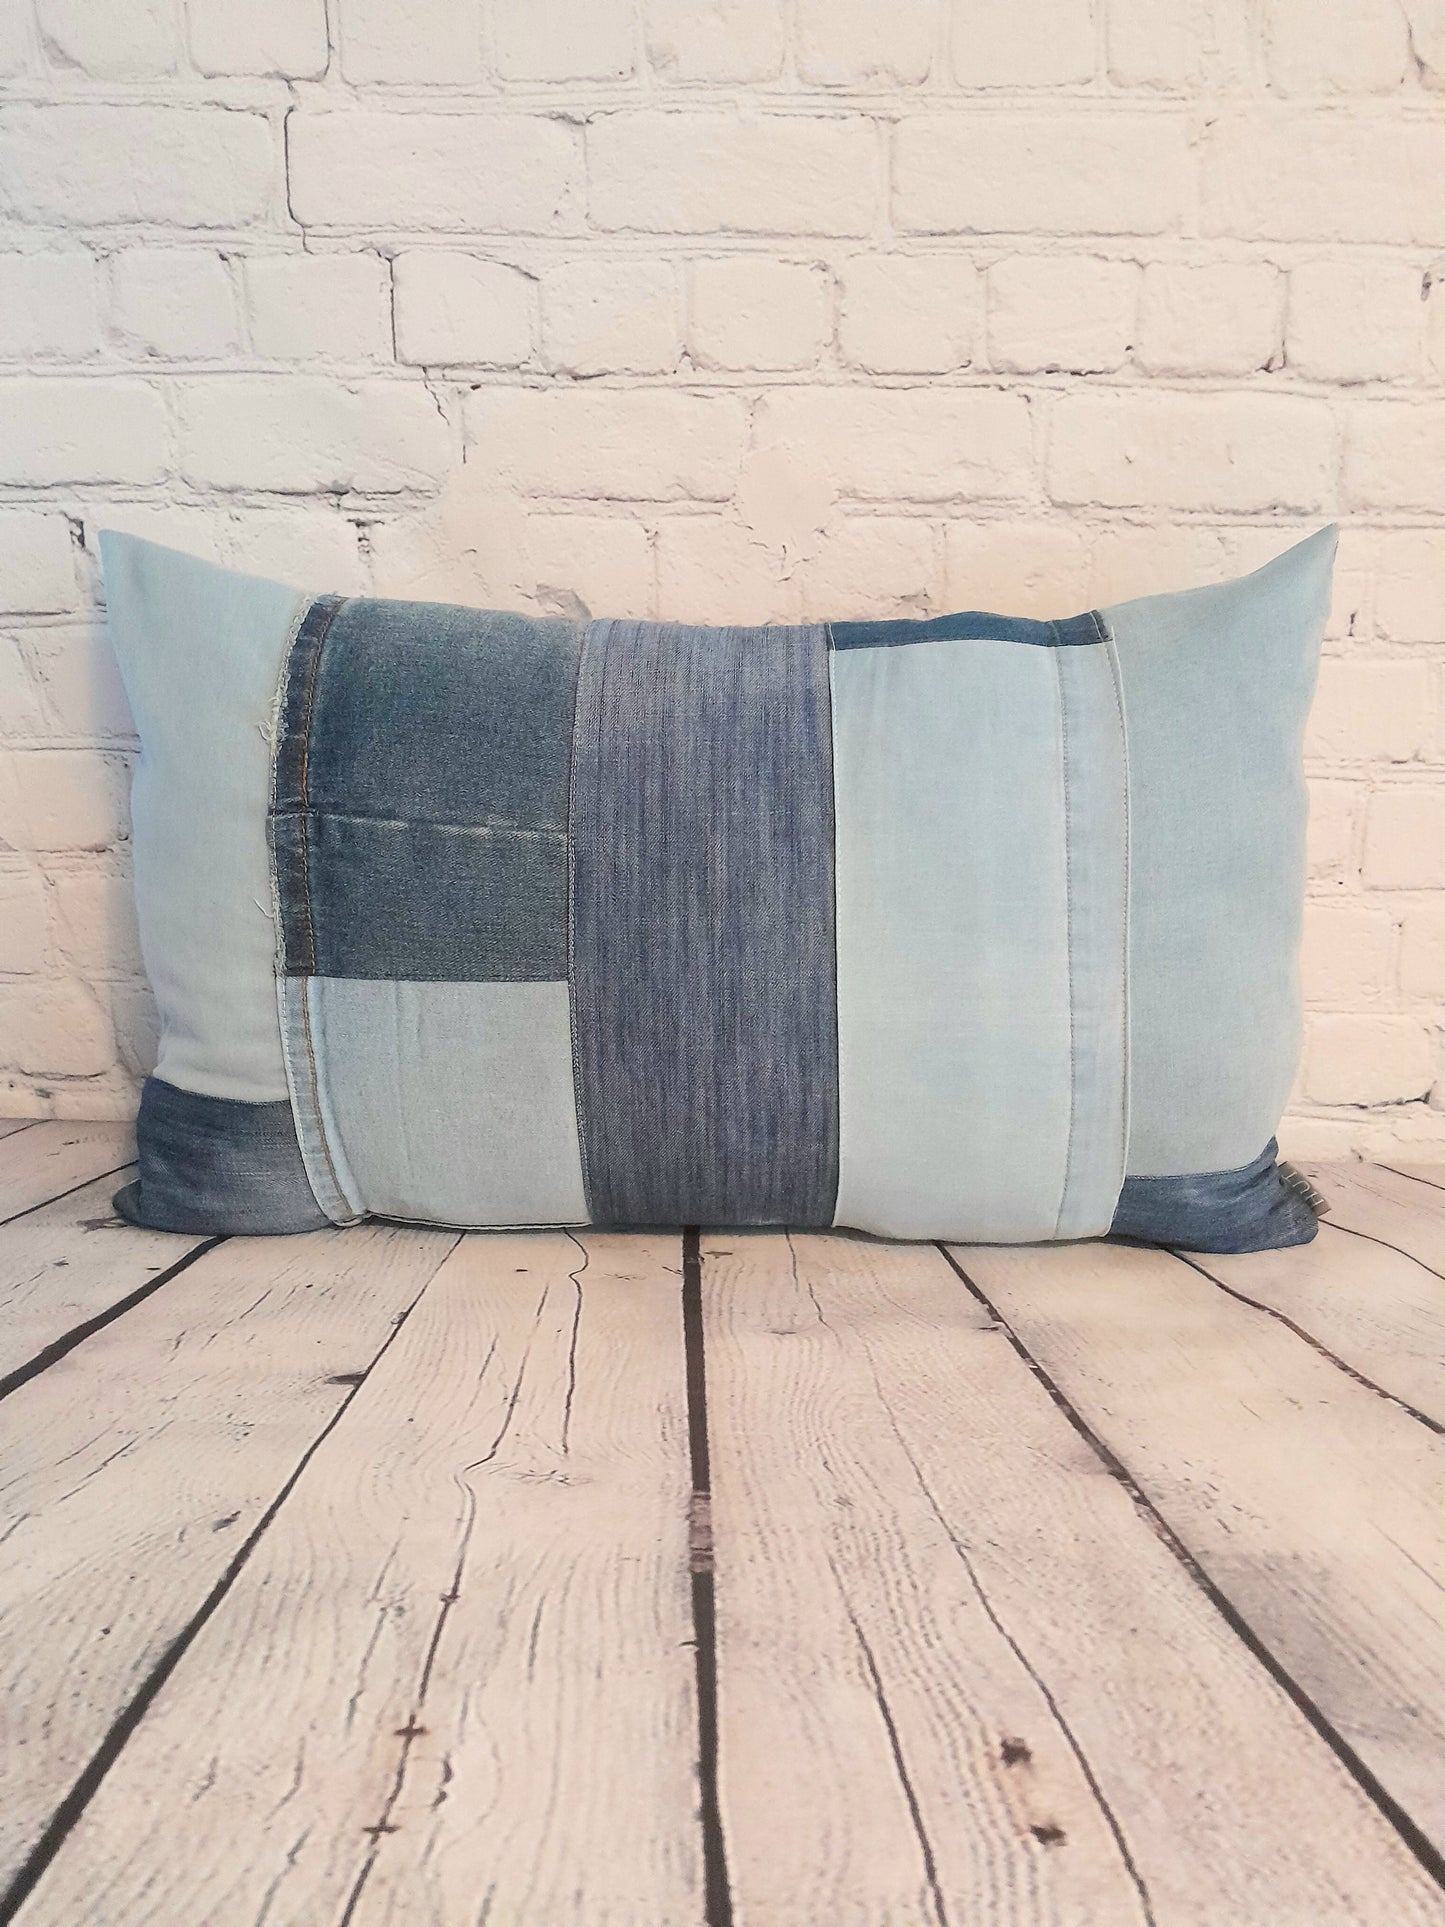 Pale denim cushion, patchwork throw pillow using upcycled denim.  Sustainable interiors.